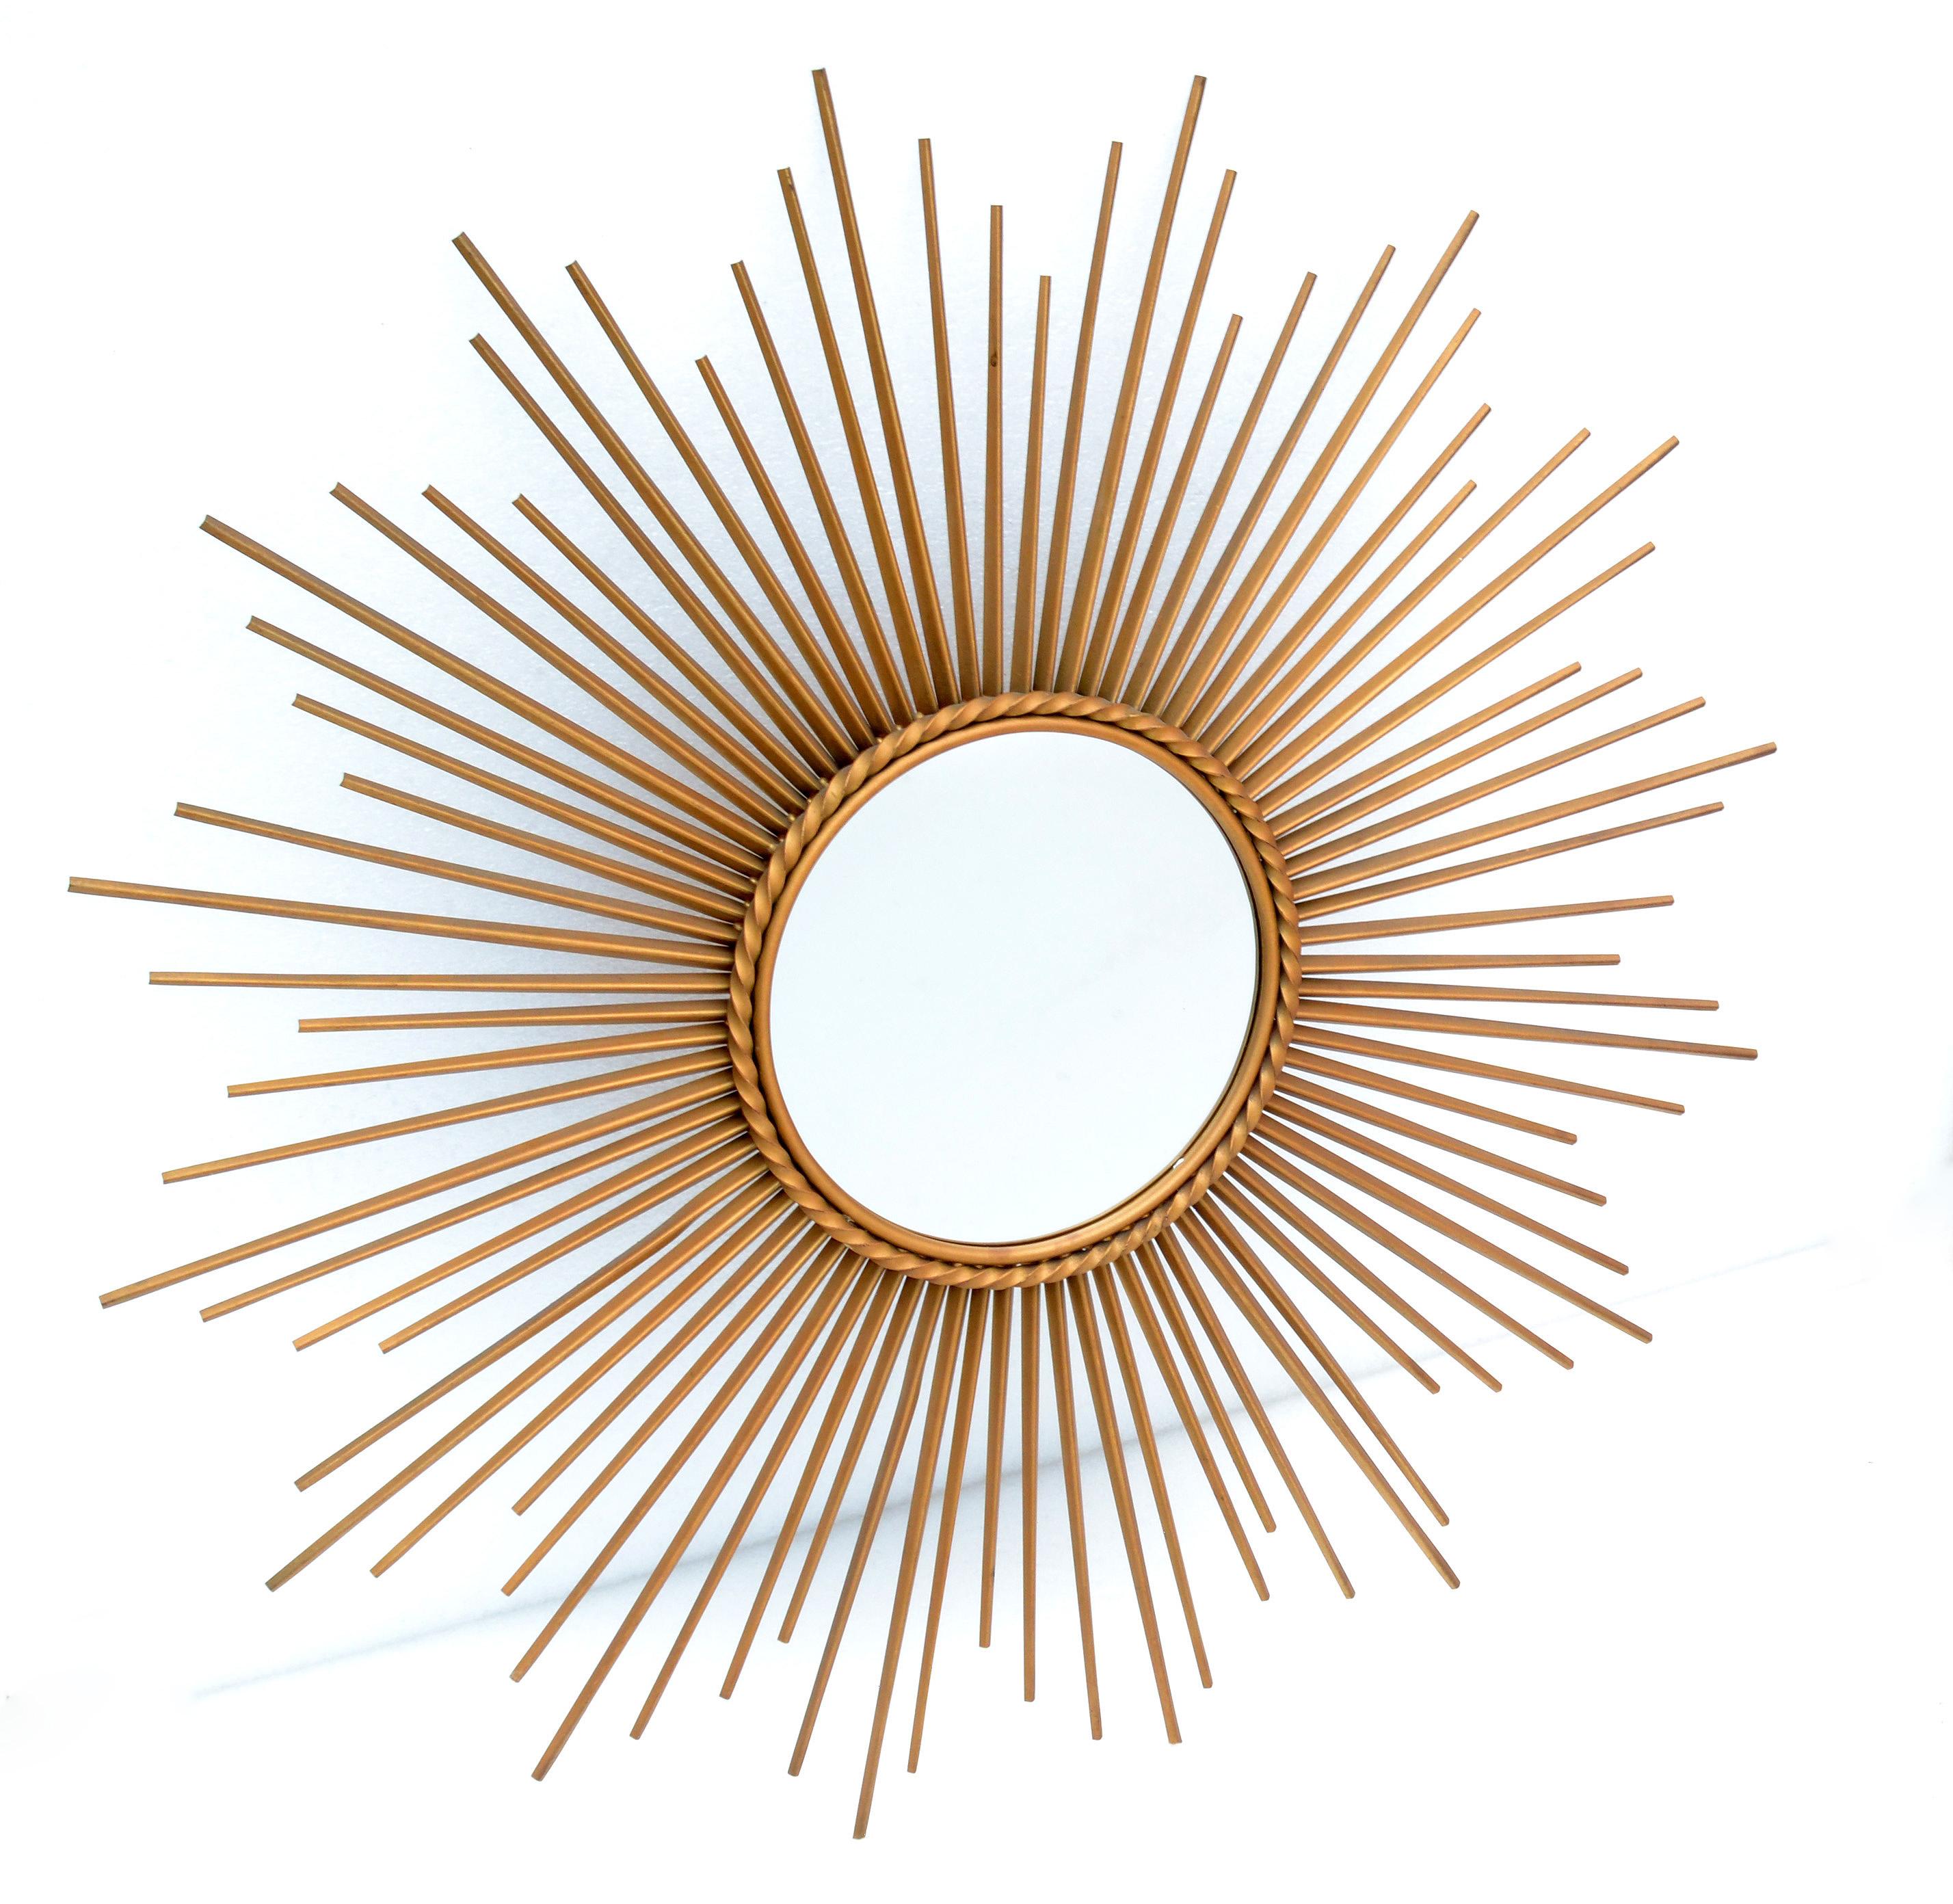 32.5 Inches Diameter brass sunburst mirror Miroir Sorciere with 9.25 inches flat central mirror.
Gold Finished Iron on a back board.
Made in France, circa 1950's.
Providence: Images in Magazine 